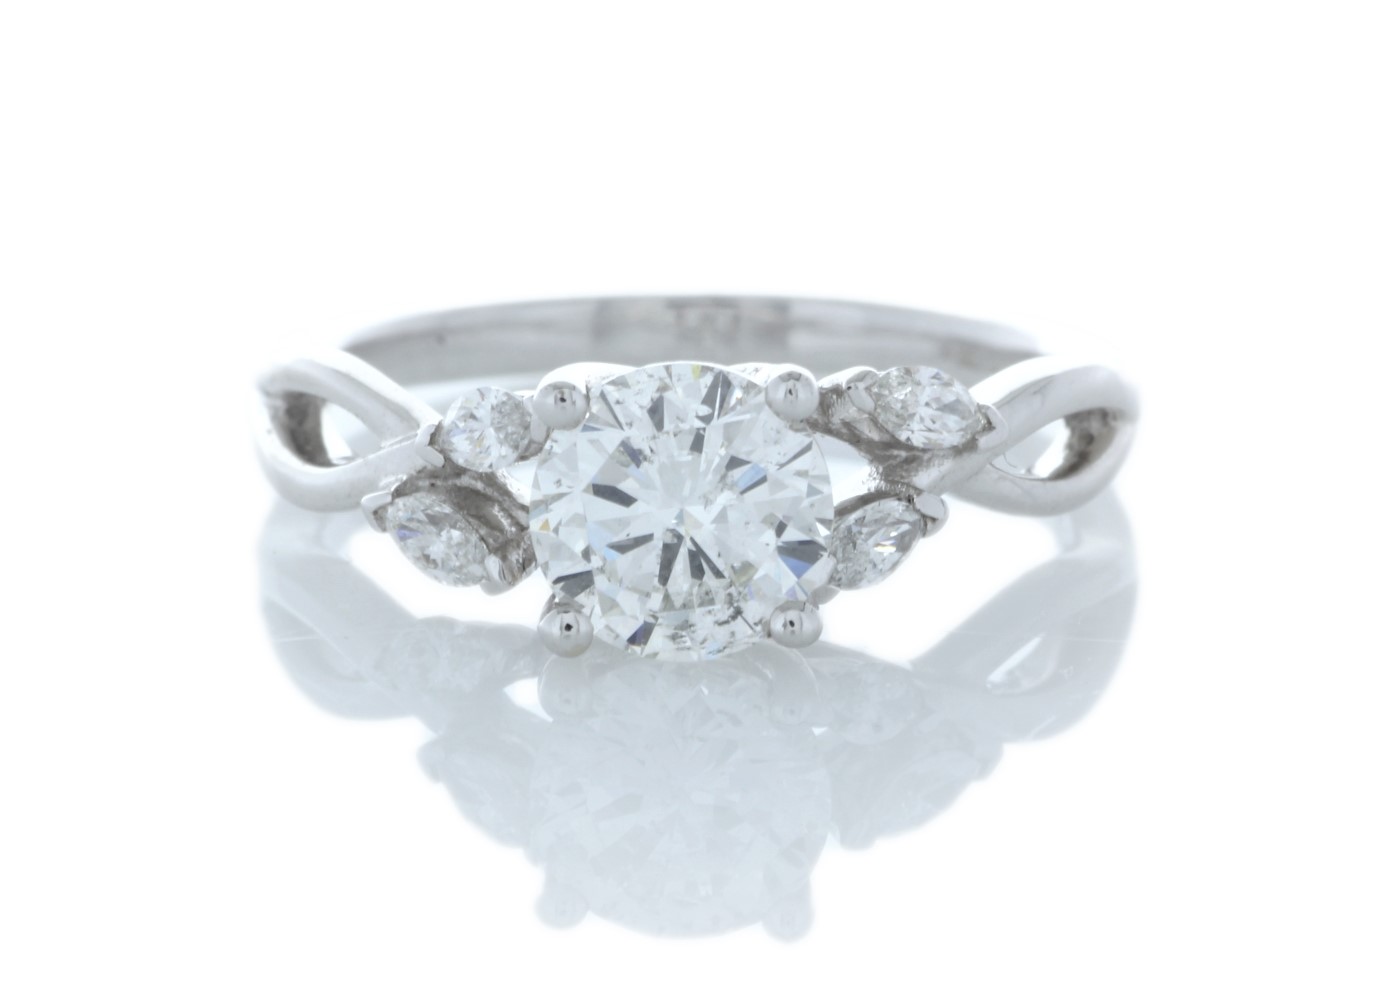 18ct White Gold Single Stone Diamond Ring With Marquise Set Shoulders (1.00) 1.16 Carats